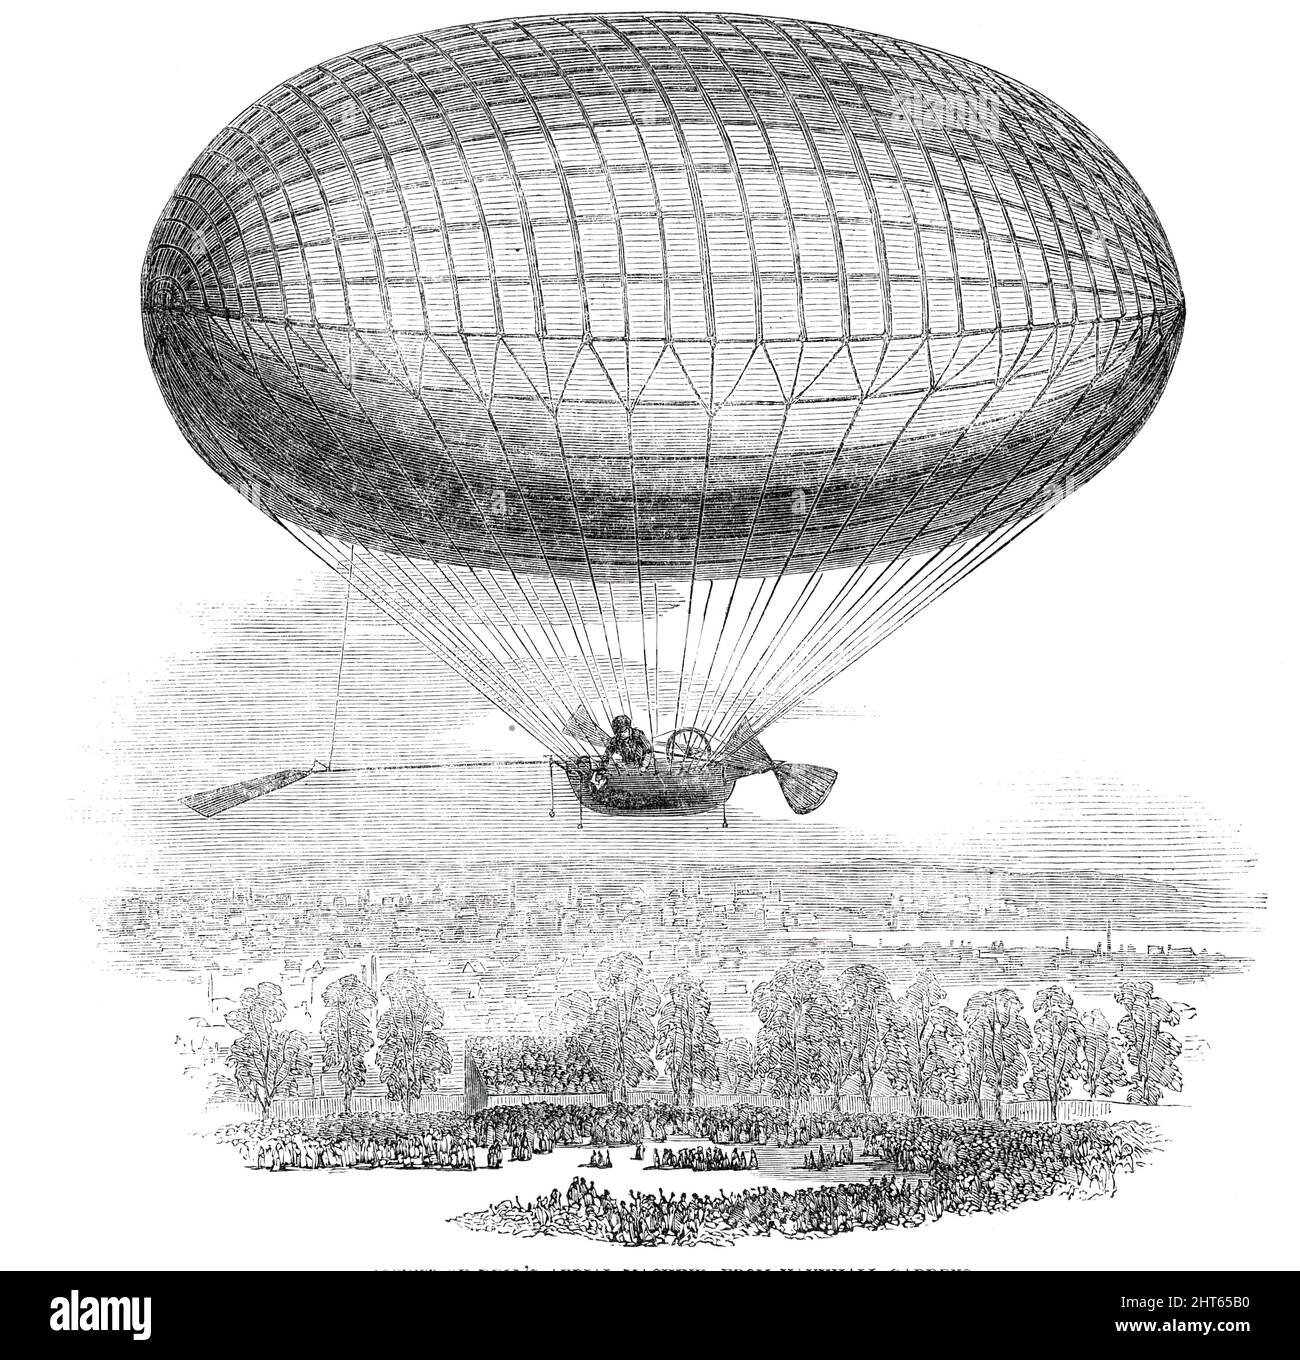 Ascent of Bell's Aerial Machine, from Vauxhall Gardens, [London], 1850. 'The machine which Mr. Bell has constructed...is capable of sustaining a weight of between 500 and 600 lb., when inflated with the ordinary carburetted hydrogen. The propellers are on the principle of the screw-propeller. If two are used, they are placed one on each side of the car...This apparatus is so constructed as to have a hinge and a rotating motion, so as to obtain the necessary movements of an extended surface or fan, in all respects similar to the tail of a bird, so that the guiding or directing of the machine ma Stock Photo